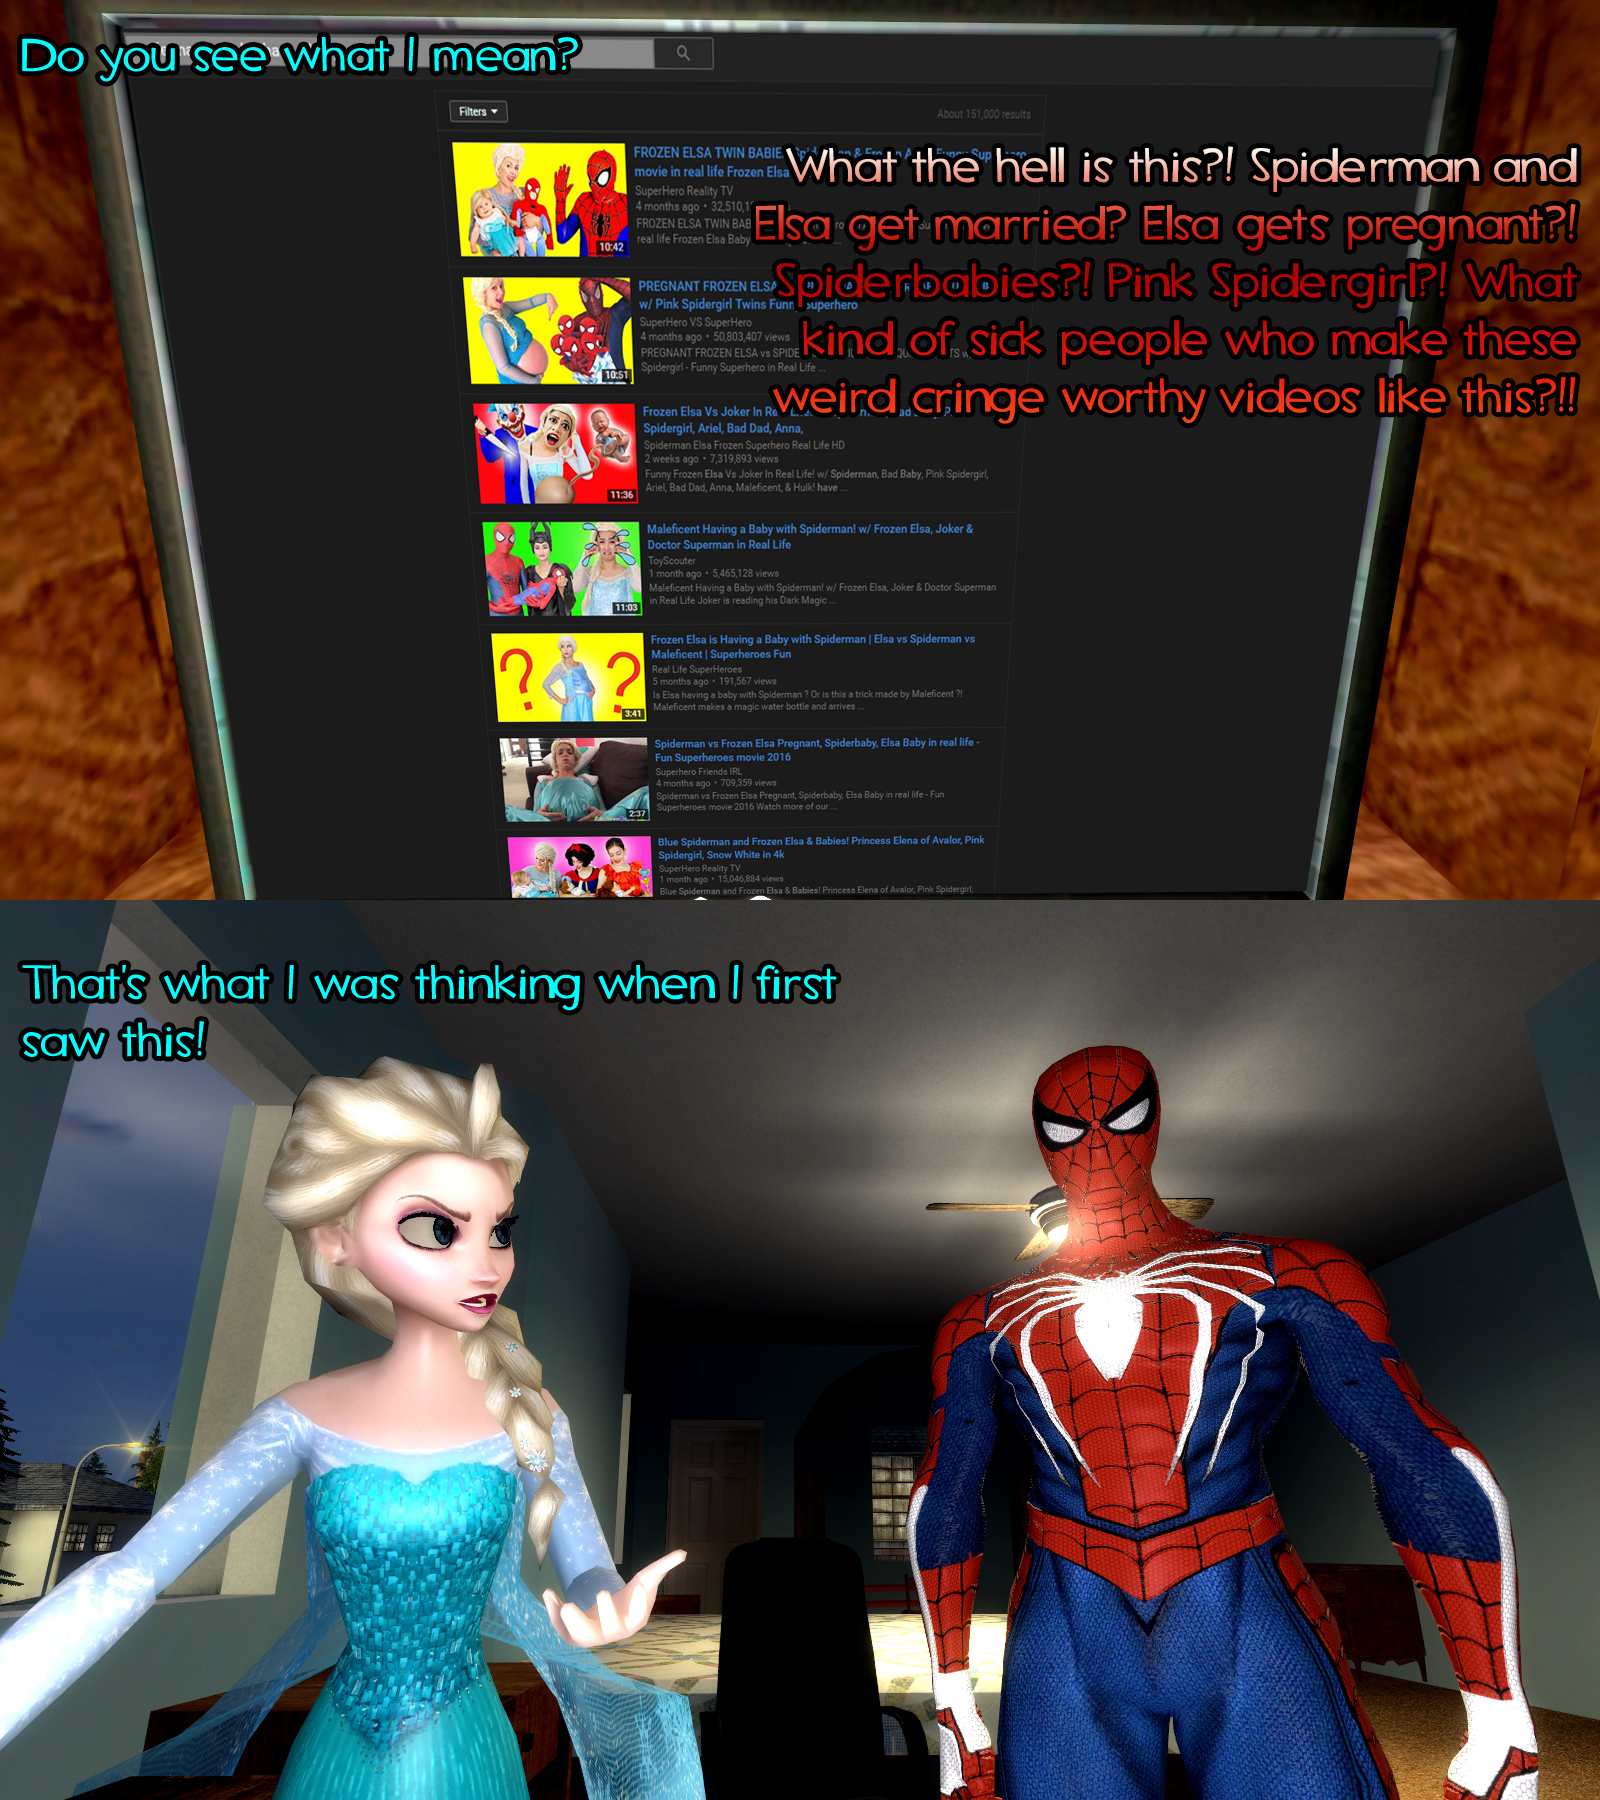 Spiderman and Elsa's Reaction to Weird Videos by ErichGrooms3 on DeviantArt